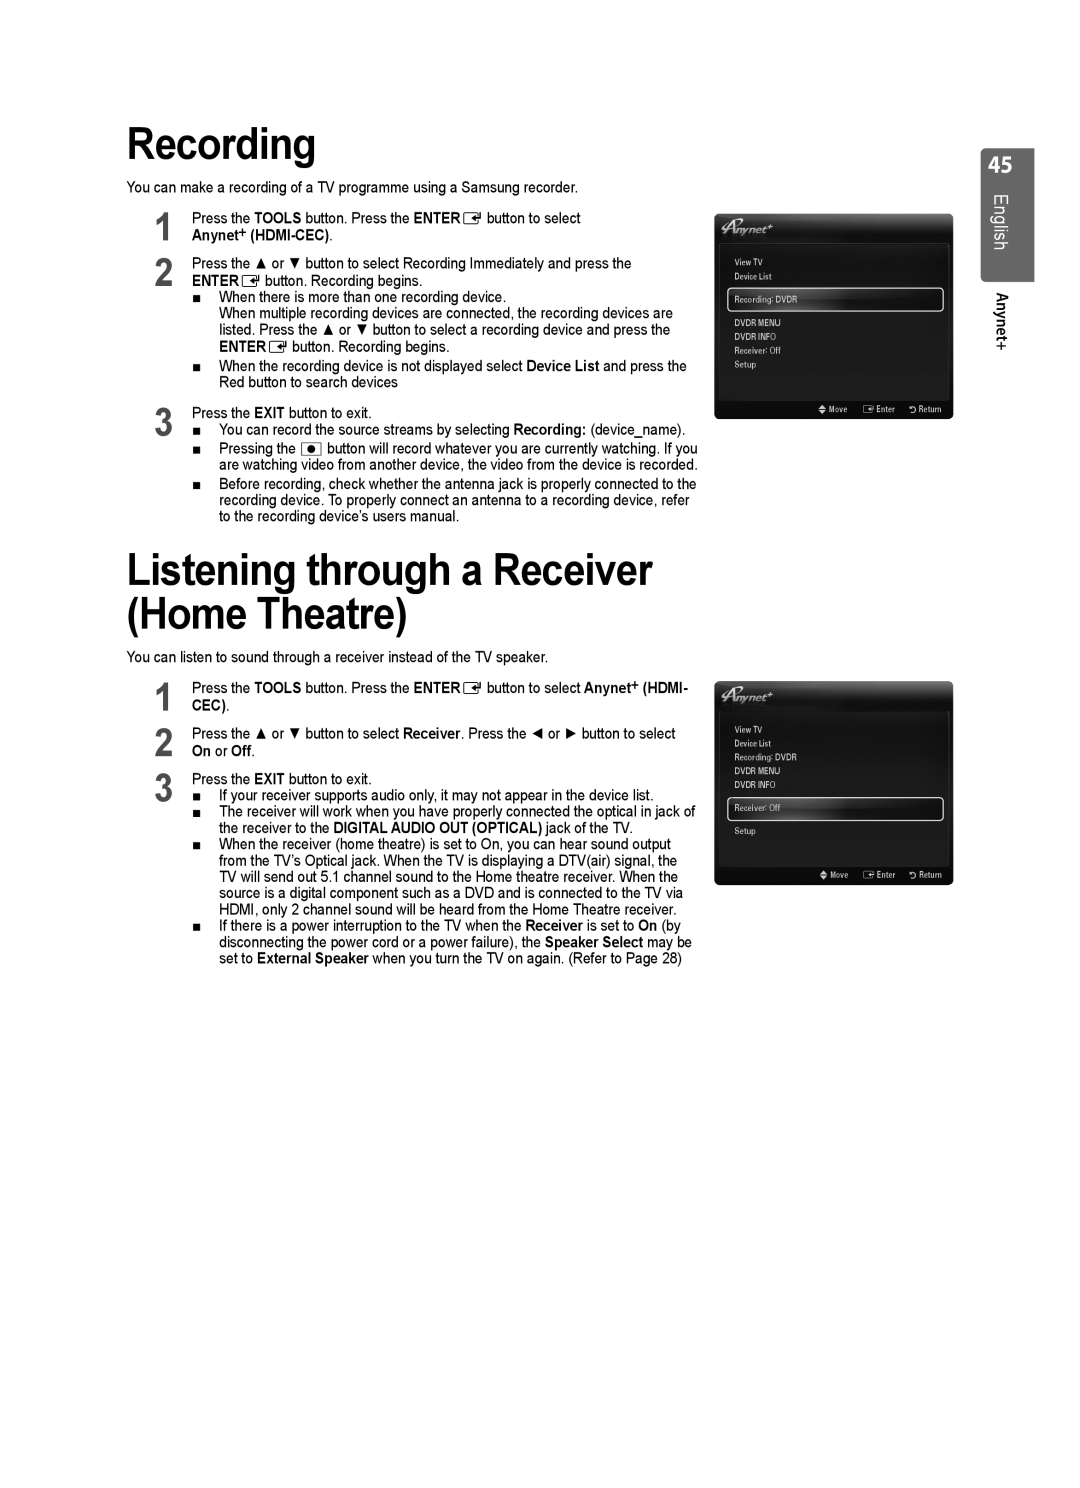 Samsung LE46B553 Recording, Listening through a Receiver Home Theatre, English Anynet+, Anynet + HDMI-CEC, On or Off 